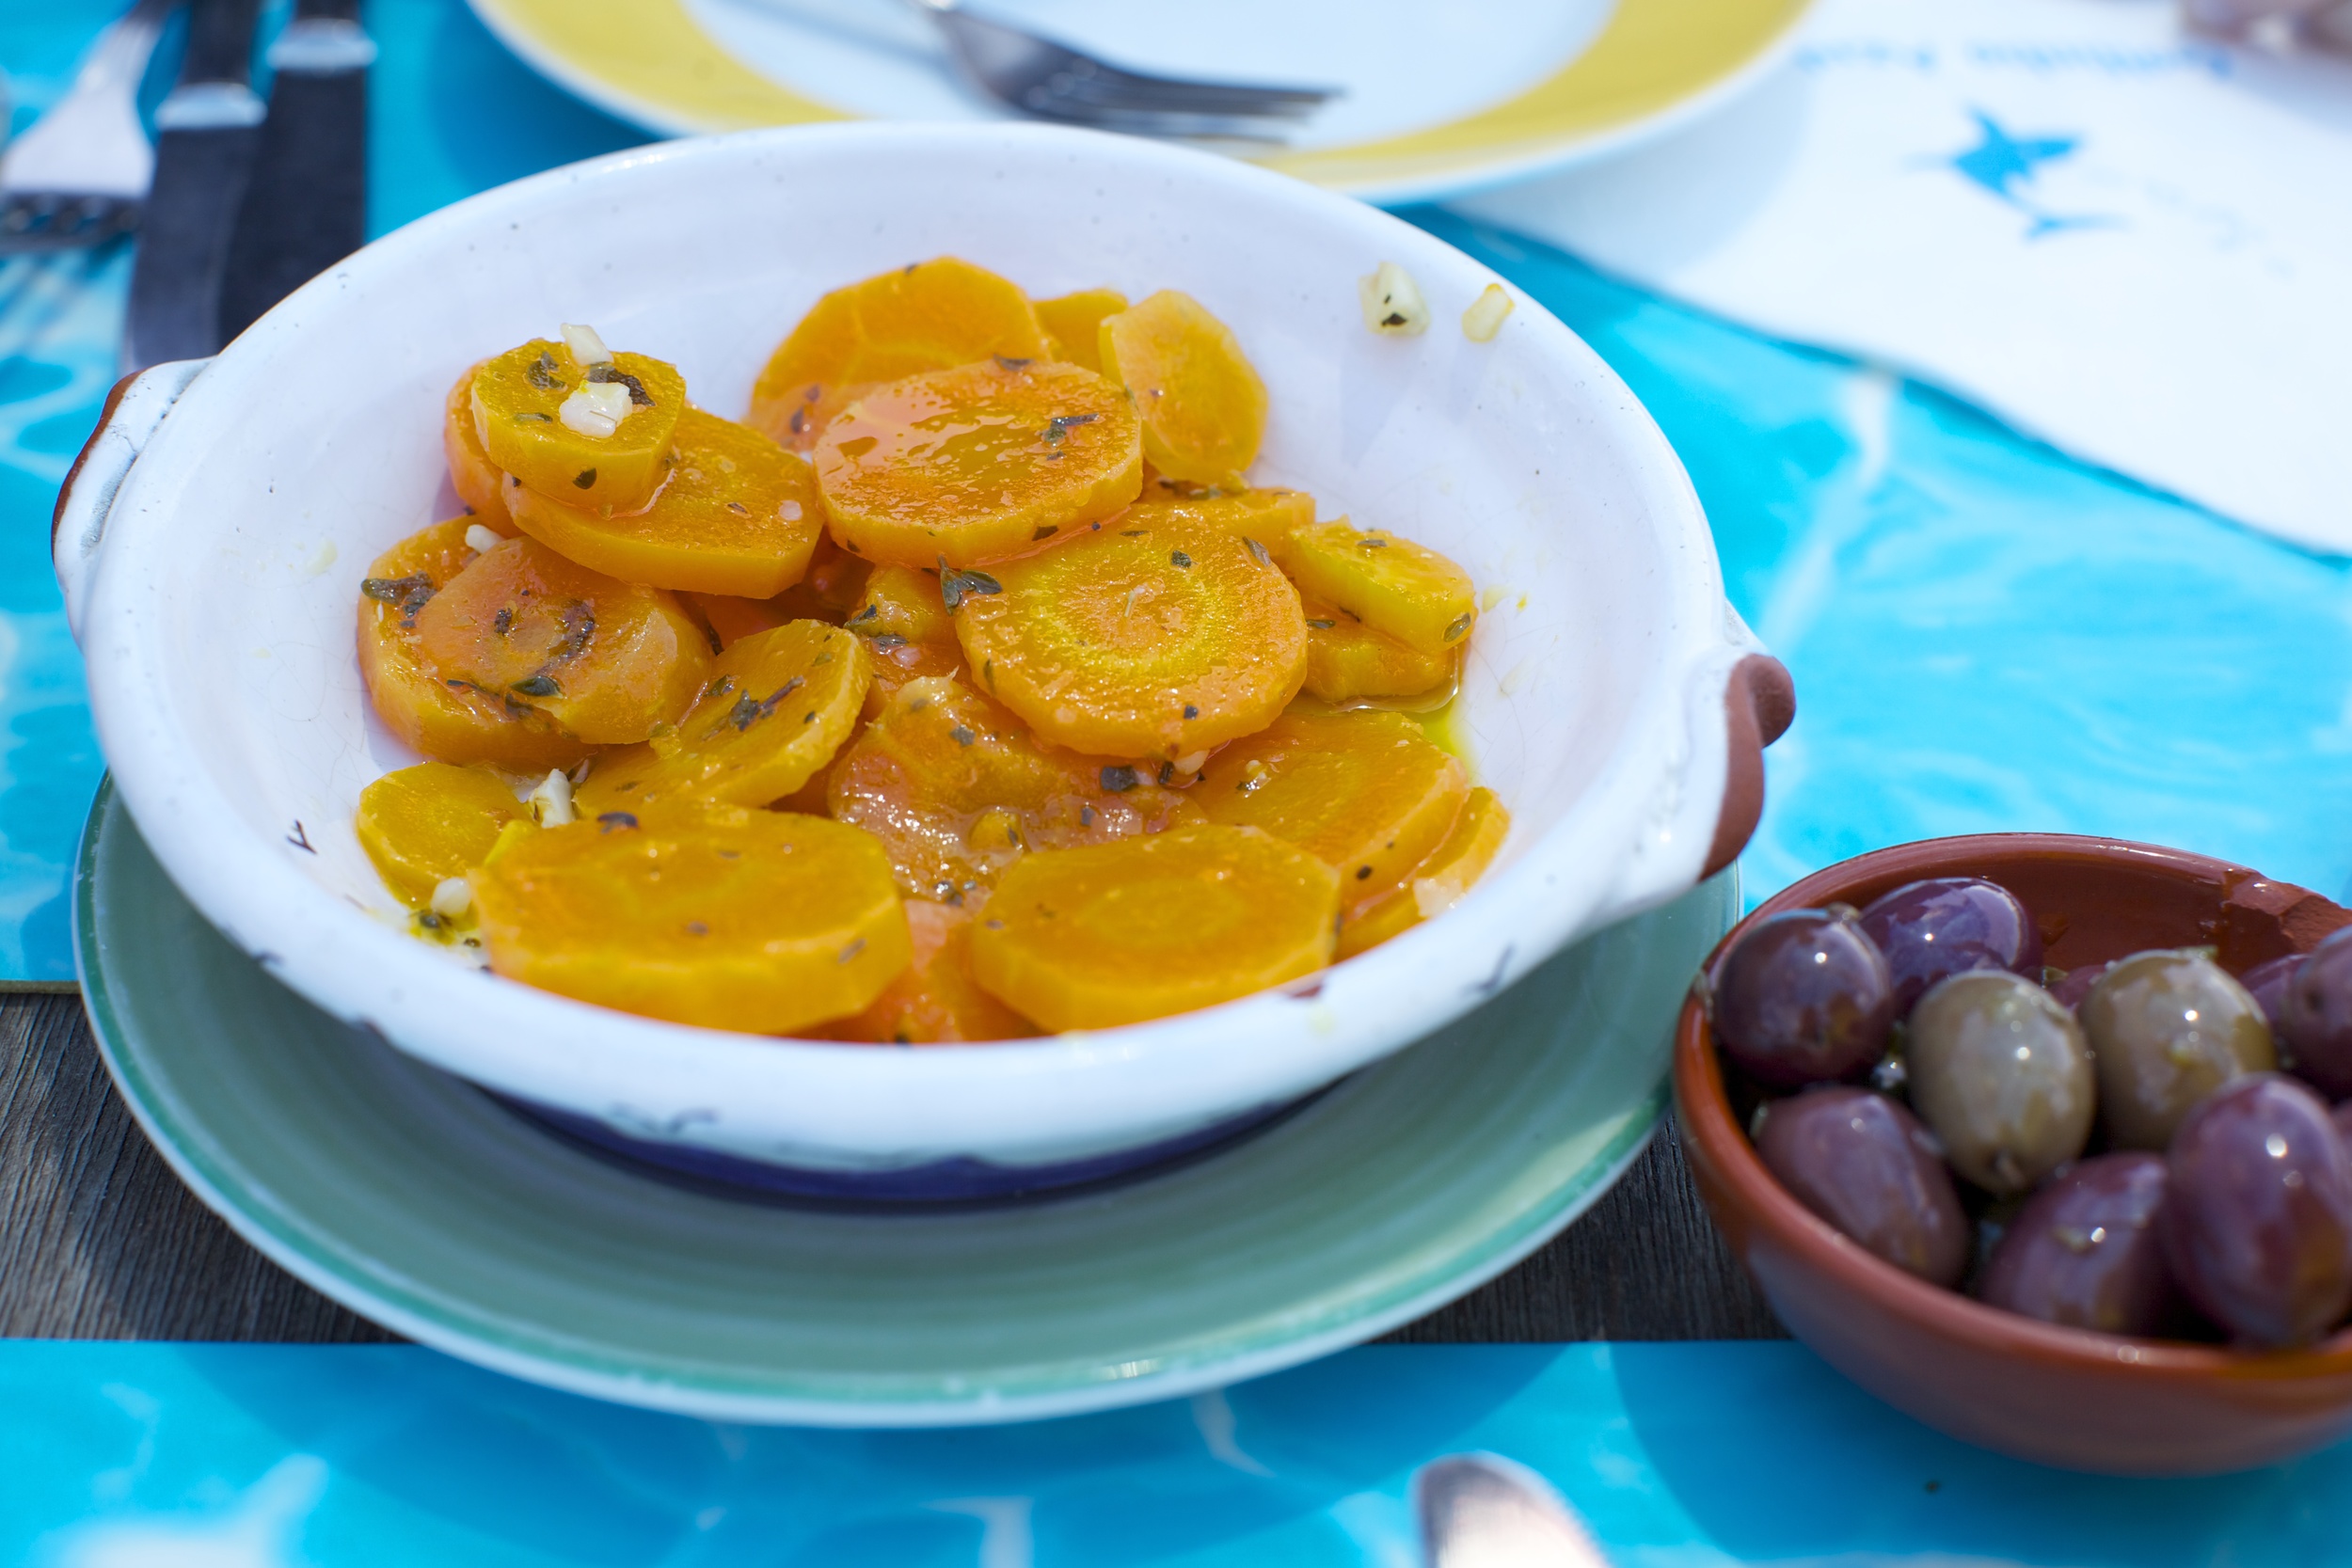 Carrot Slices and Olives (Portugal)